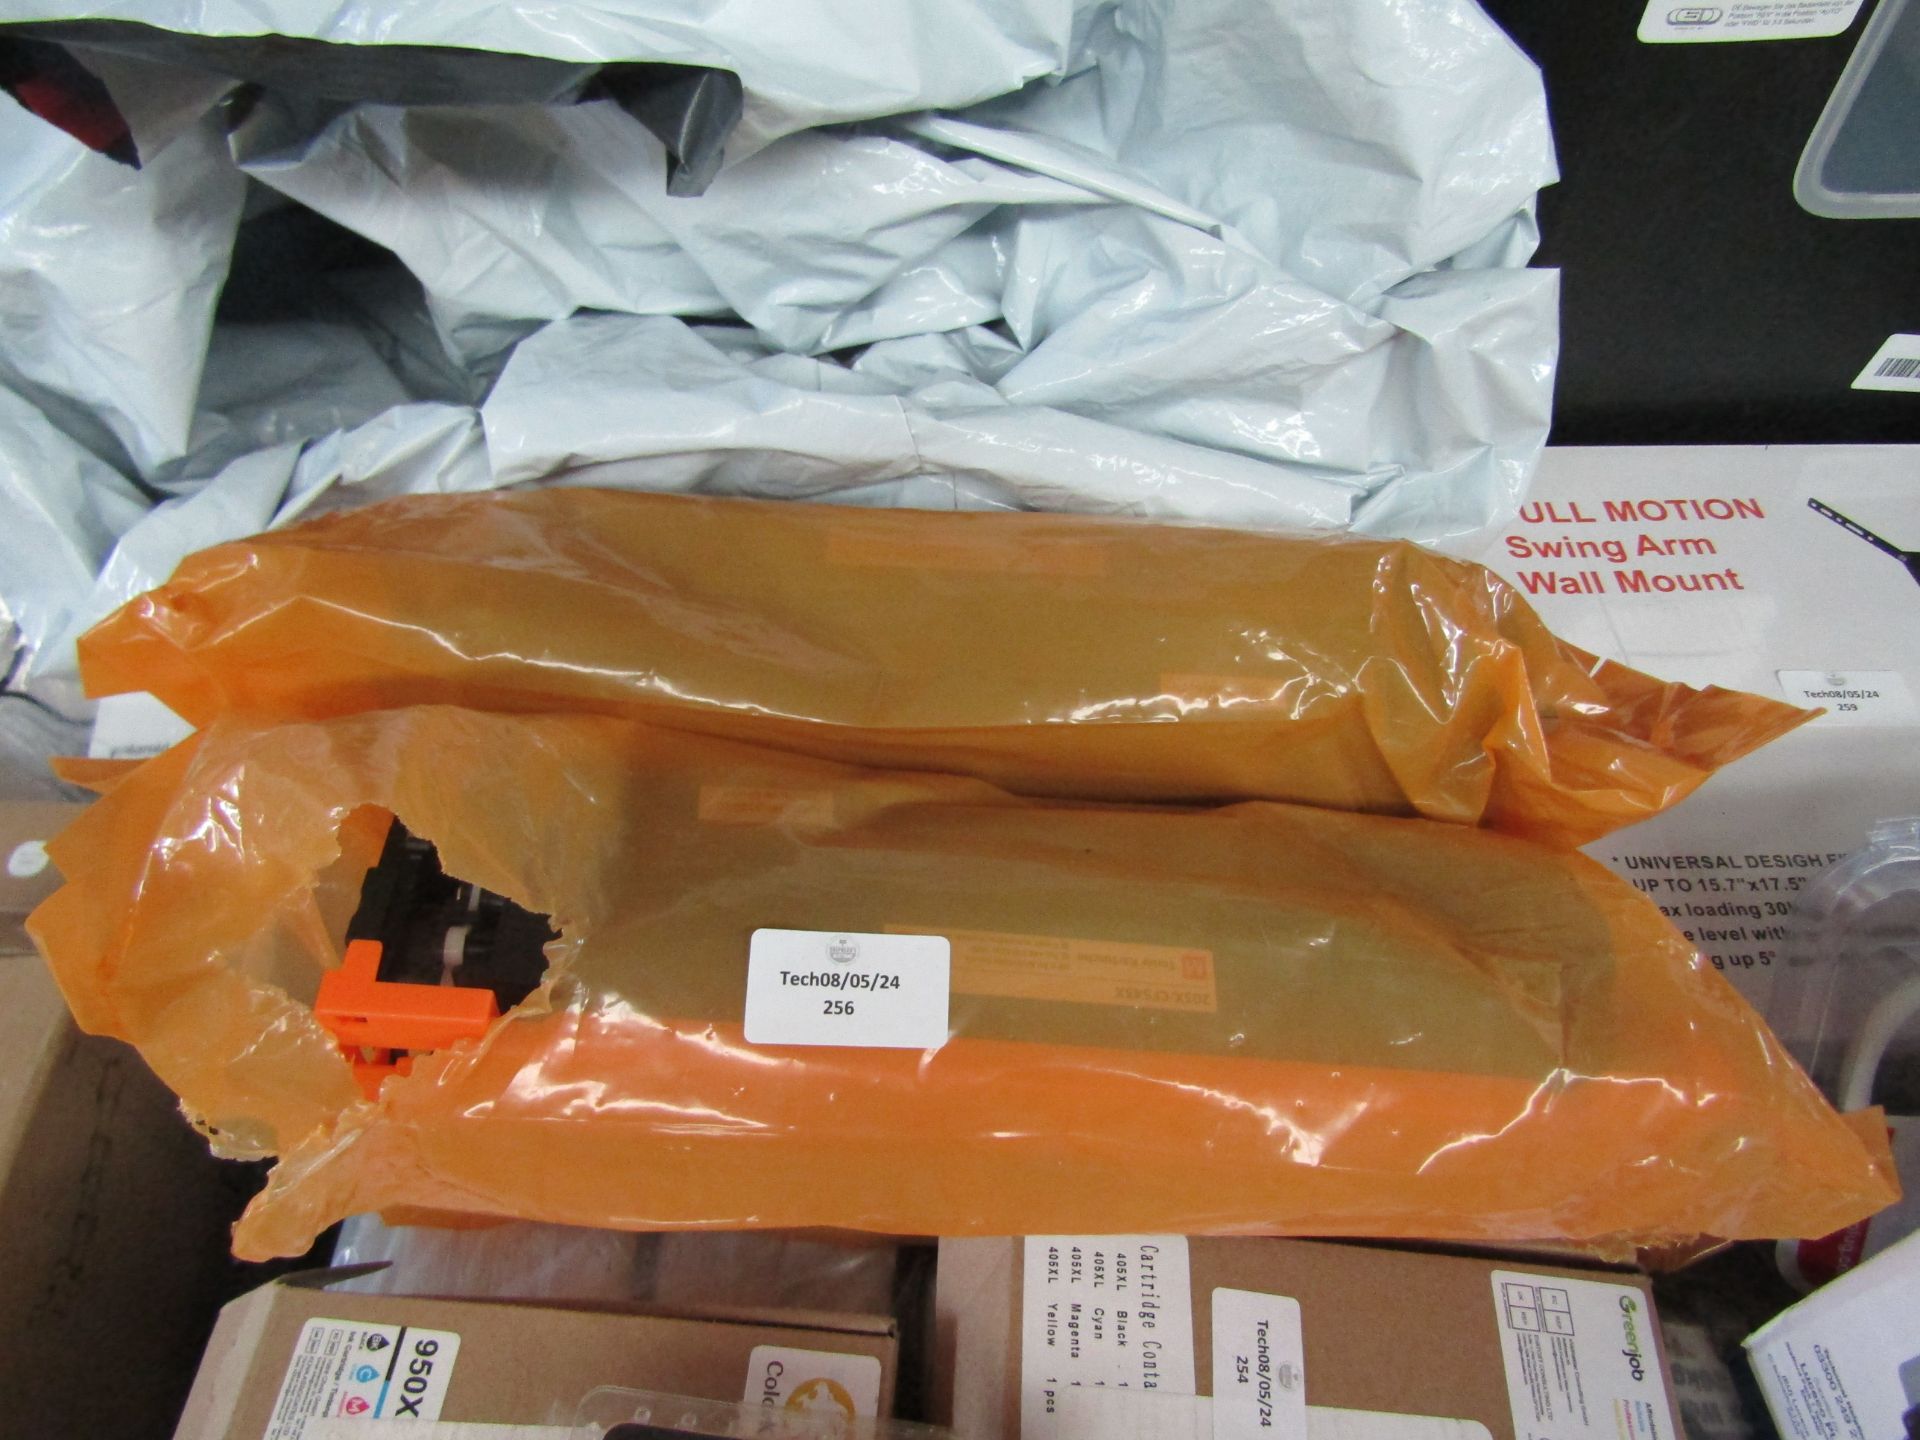 5x Tonner Cartridges, Unchecked & Packaged. See Image.